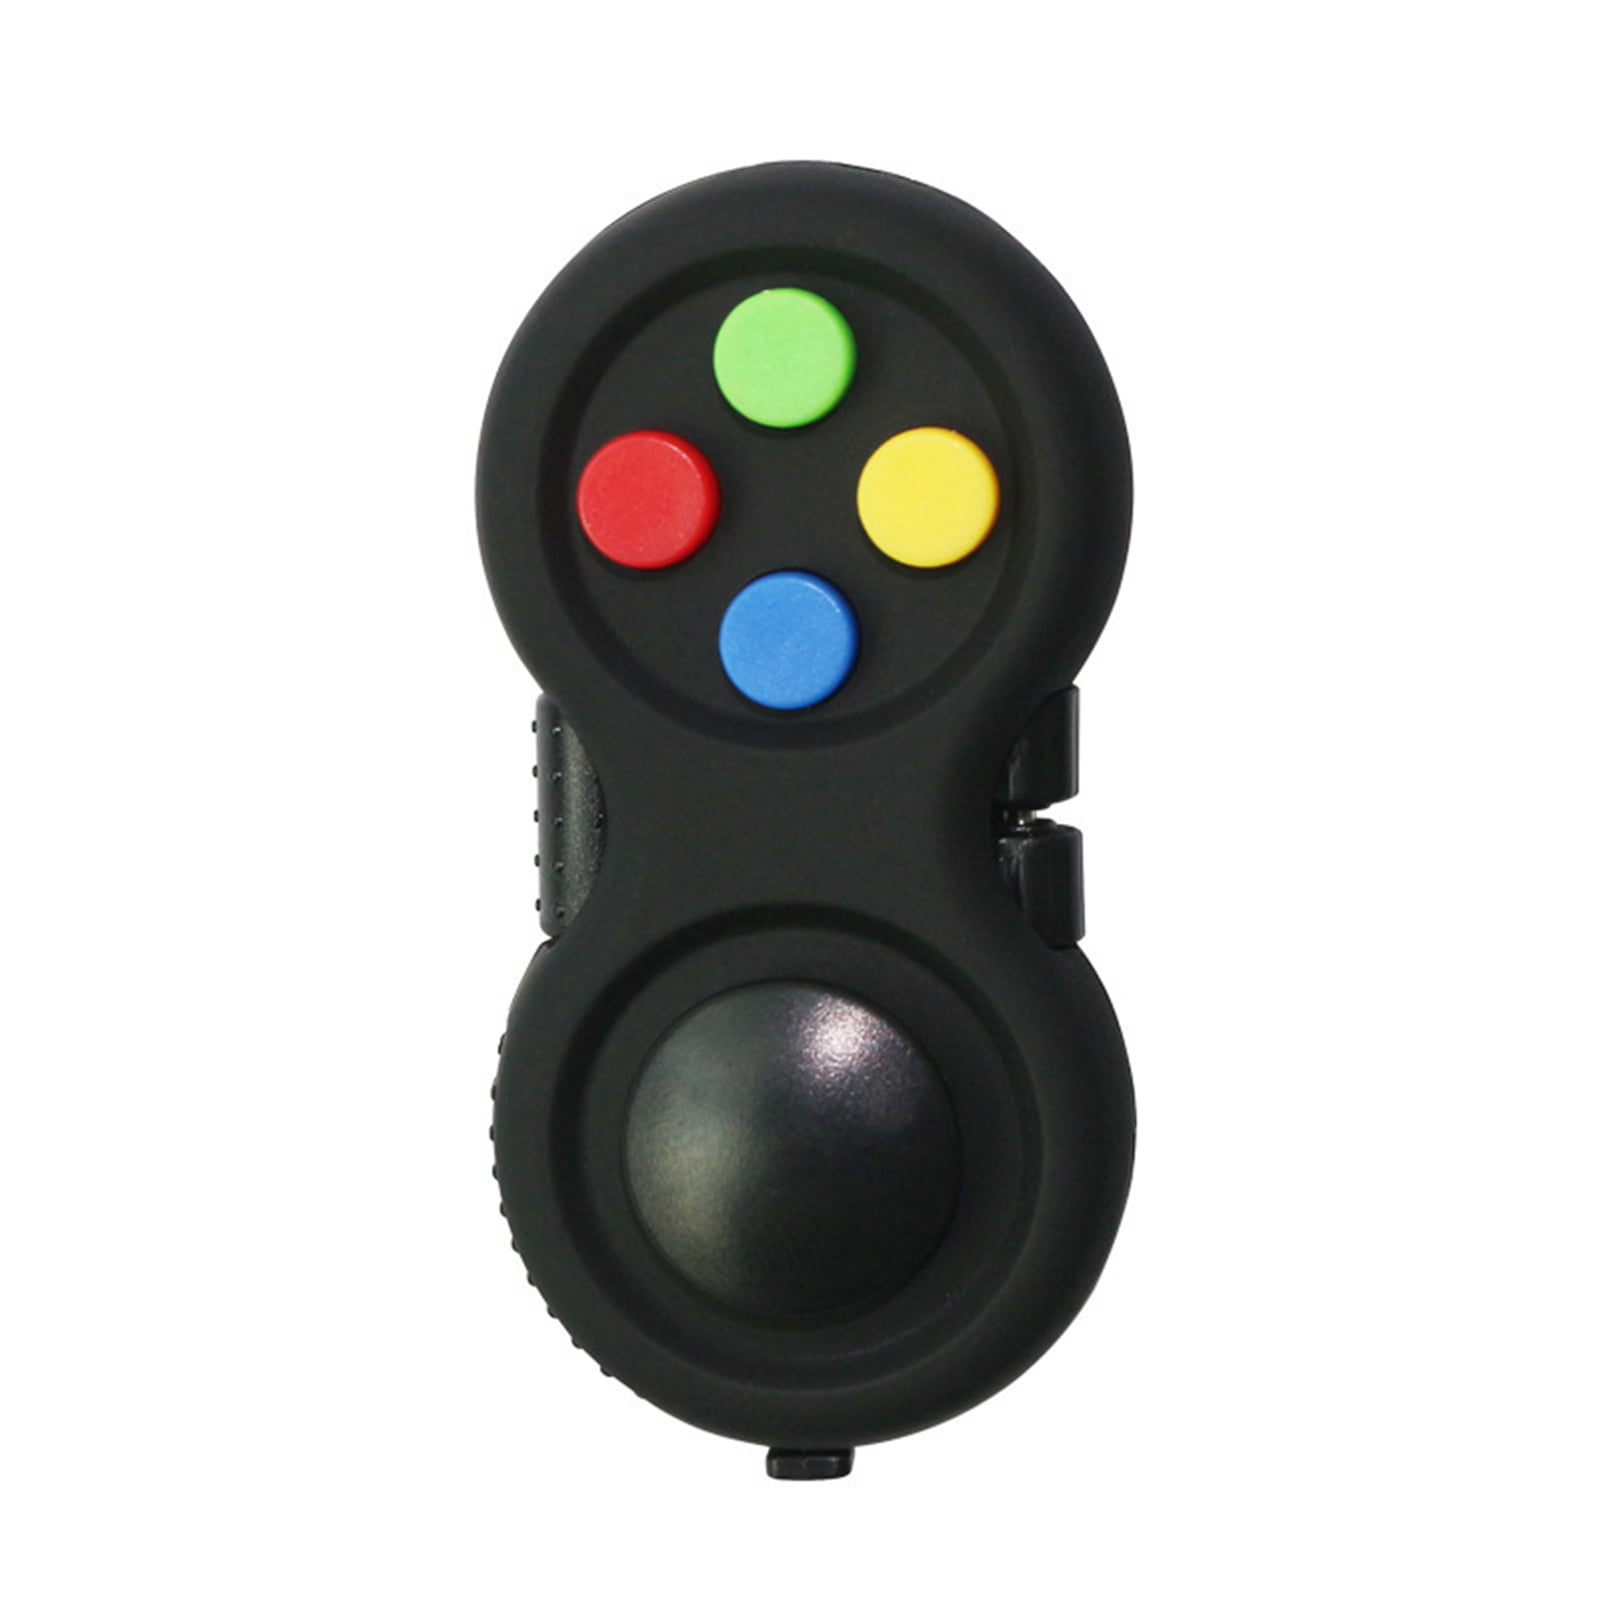 Details about   Fidget Pad Controller Game Toys ADHD Kids Anxiety Depression Stress Relief 